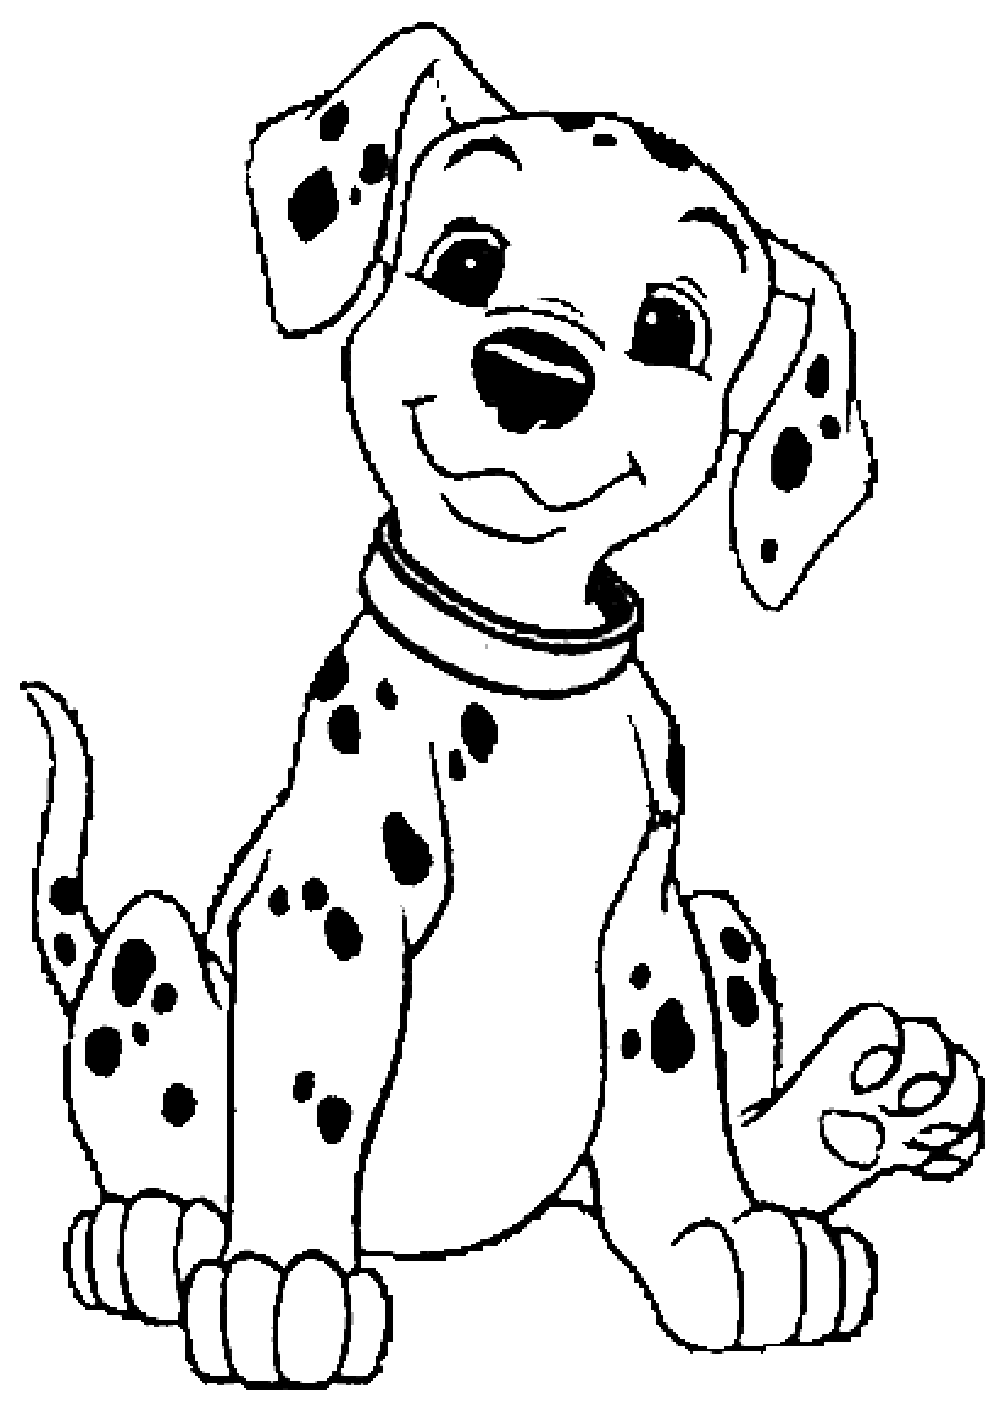 20 Dalmations Coloring Pages   Best Coloring Pages For Kids